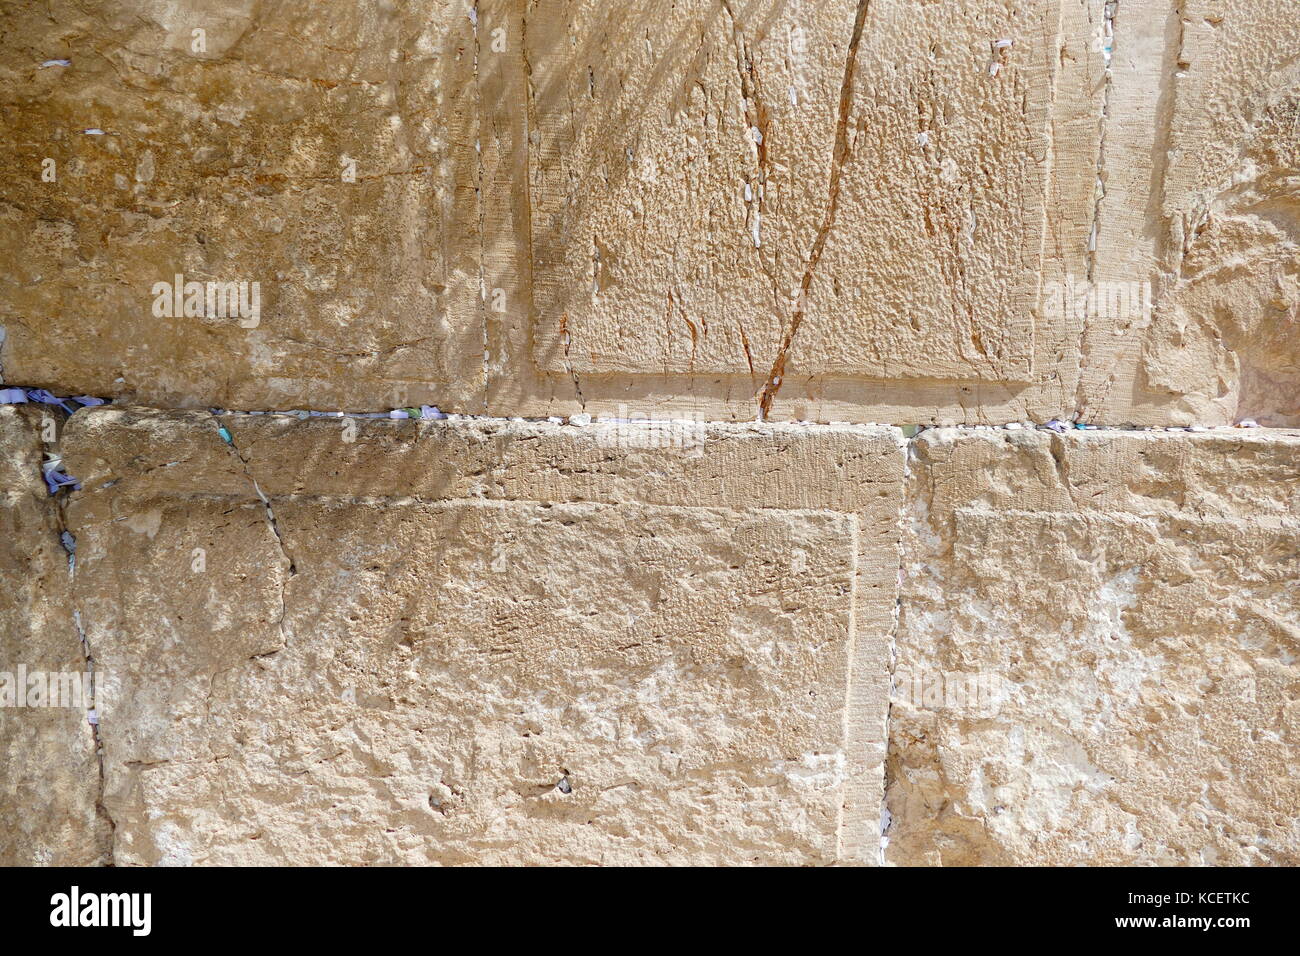 Slips of paper containing prayers in the cracks of the Western Wall (Ha-Kotel Ha-Ma'aravi) in Jerusalem. The Wall is the holiest of Jewish sites, sacred because it is a remnant of the Herodian retaining wall that once enclosed and supported the Second Temple. It has also been called the 'Wailing Wall' Stock Photo